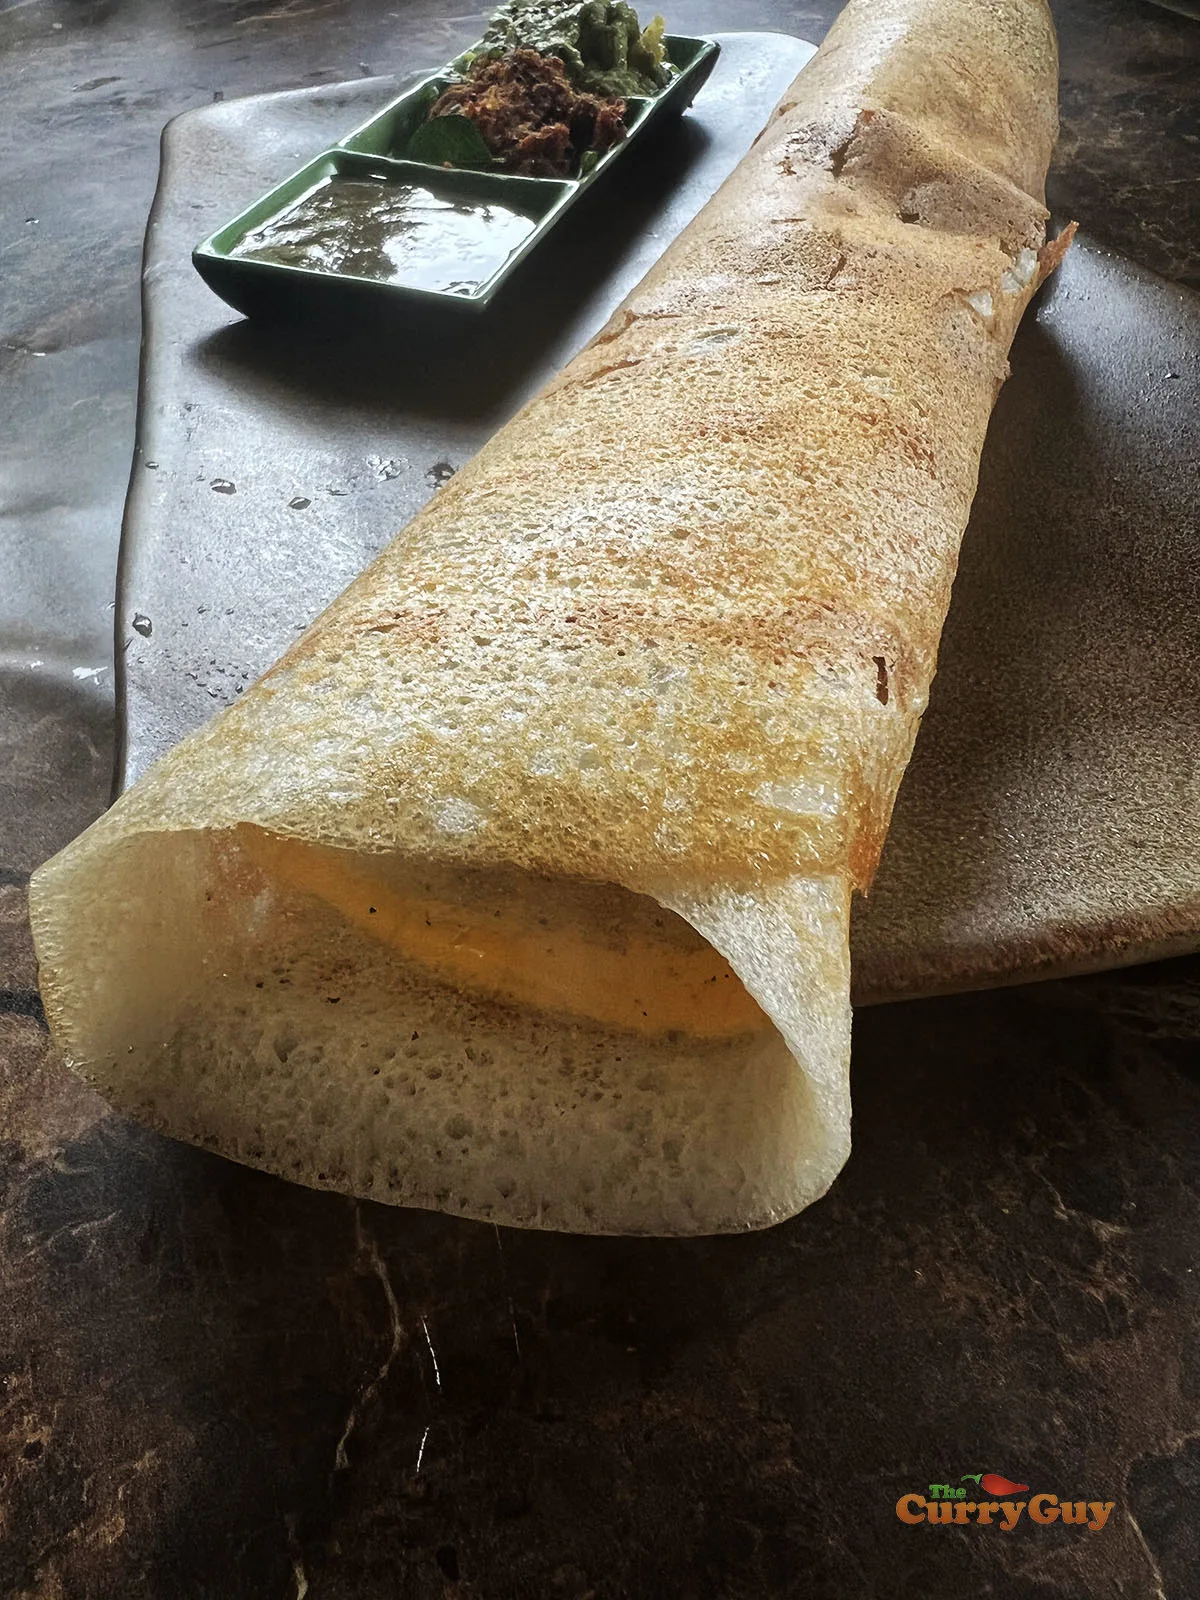 Egg dosa rolled up ready to serve.